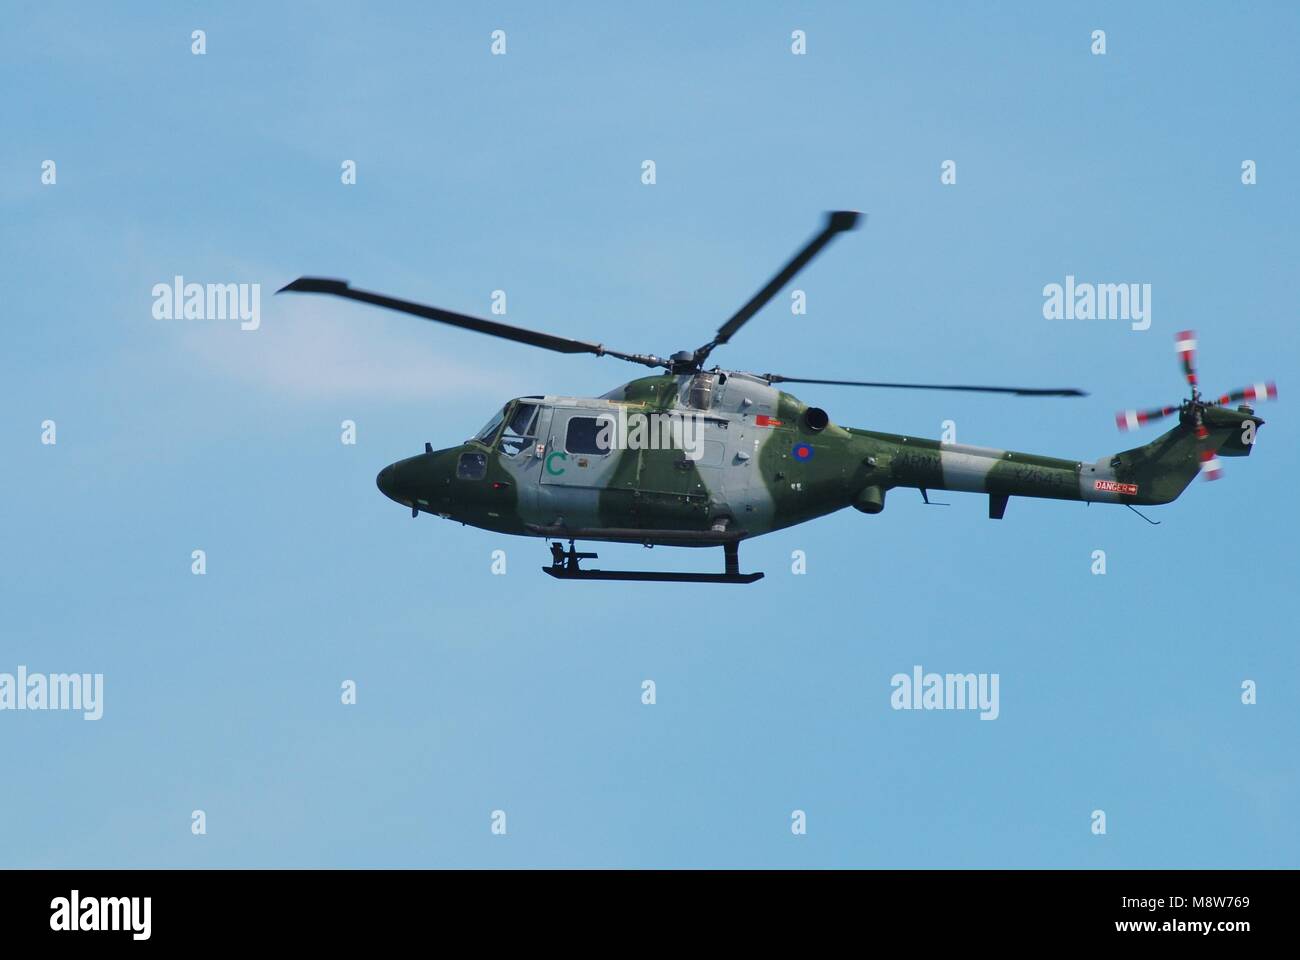 A Westland Lynx AH.7 helicopter of the British Army Air Corps (AAC) performs at the Airbourne airshow at Eastbourne, England on August 11, 2012. Stock Photo